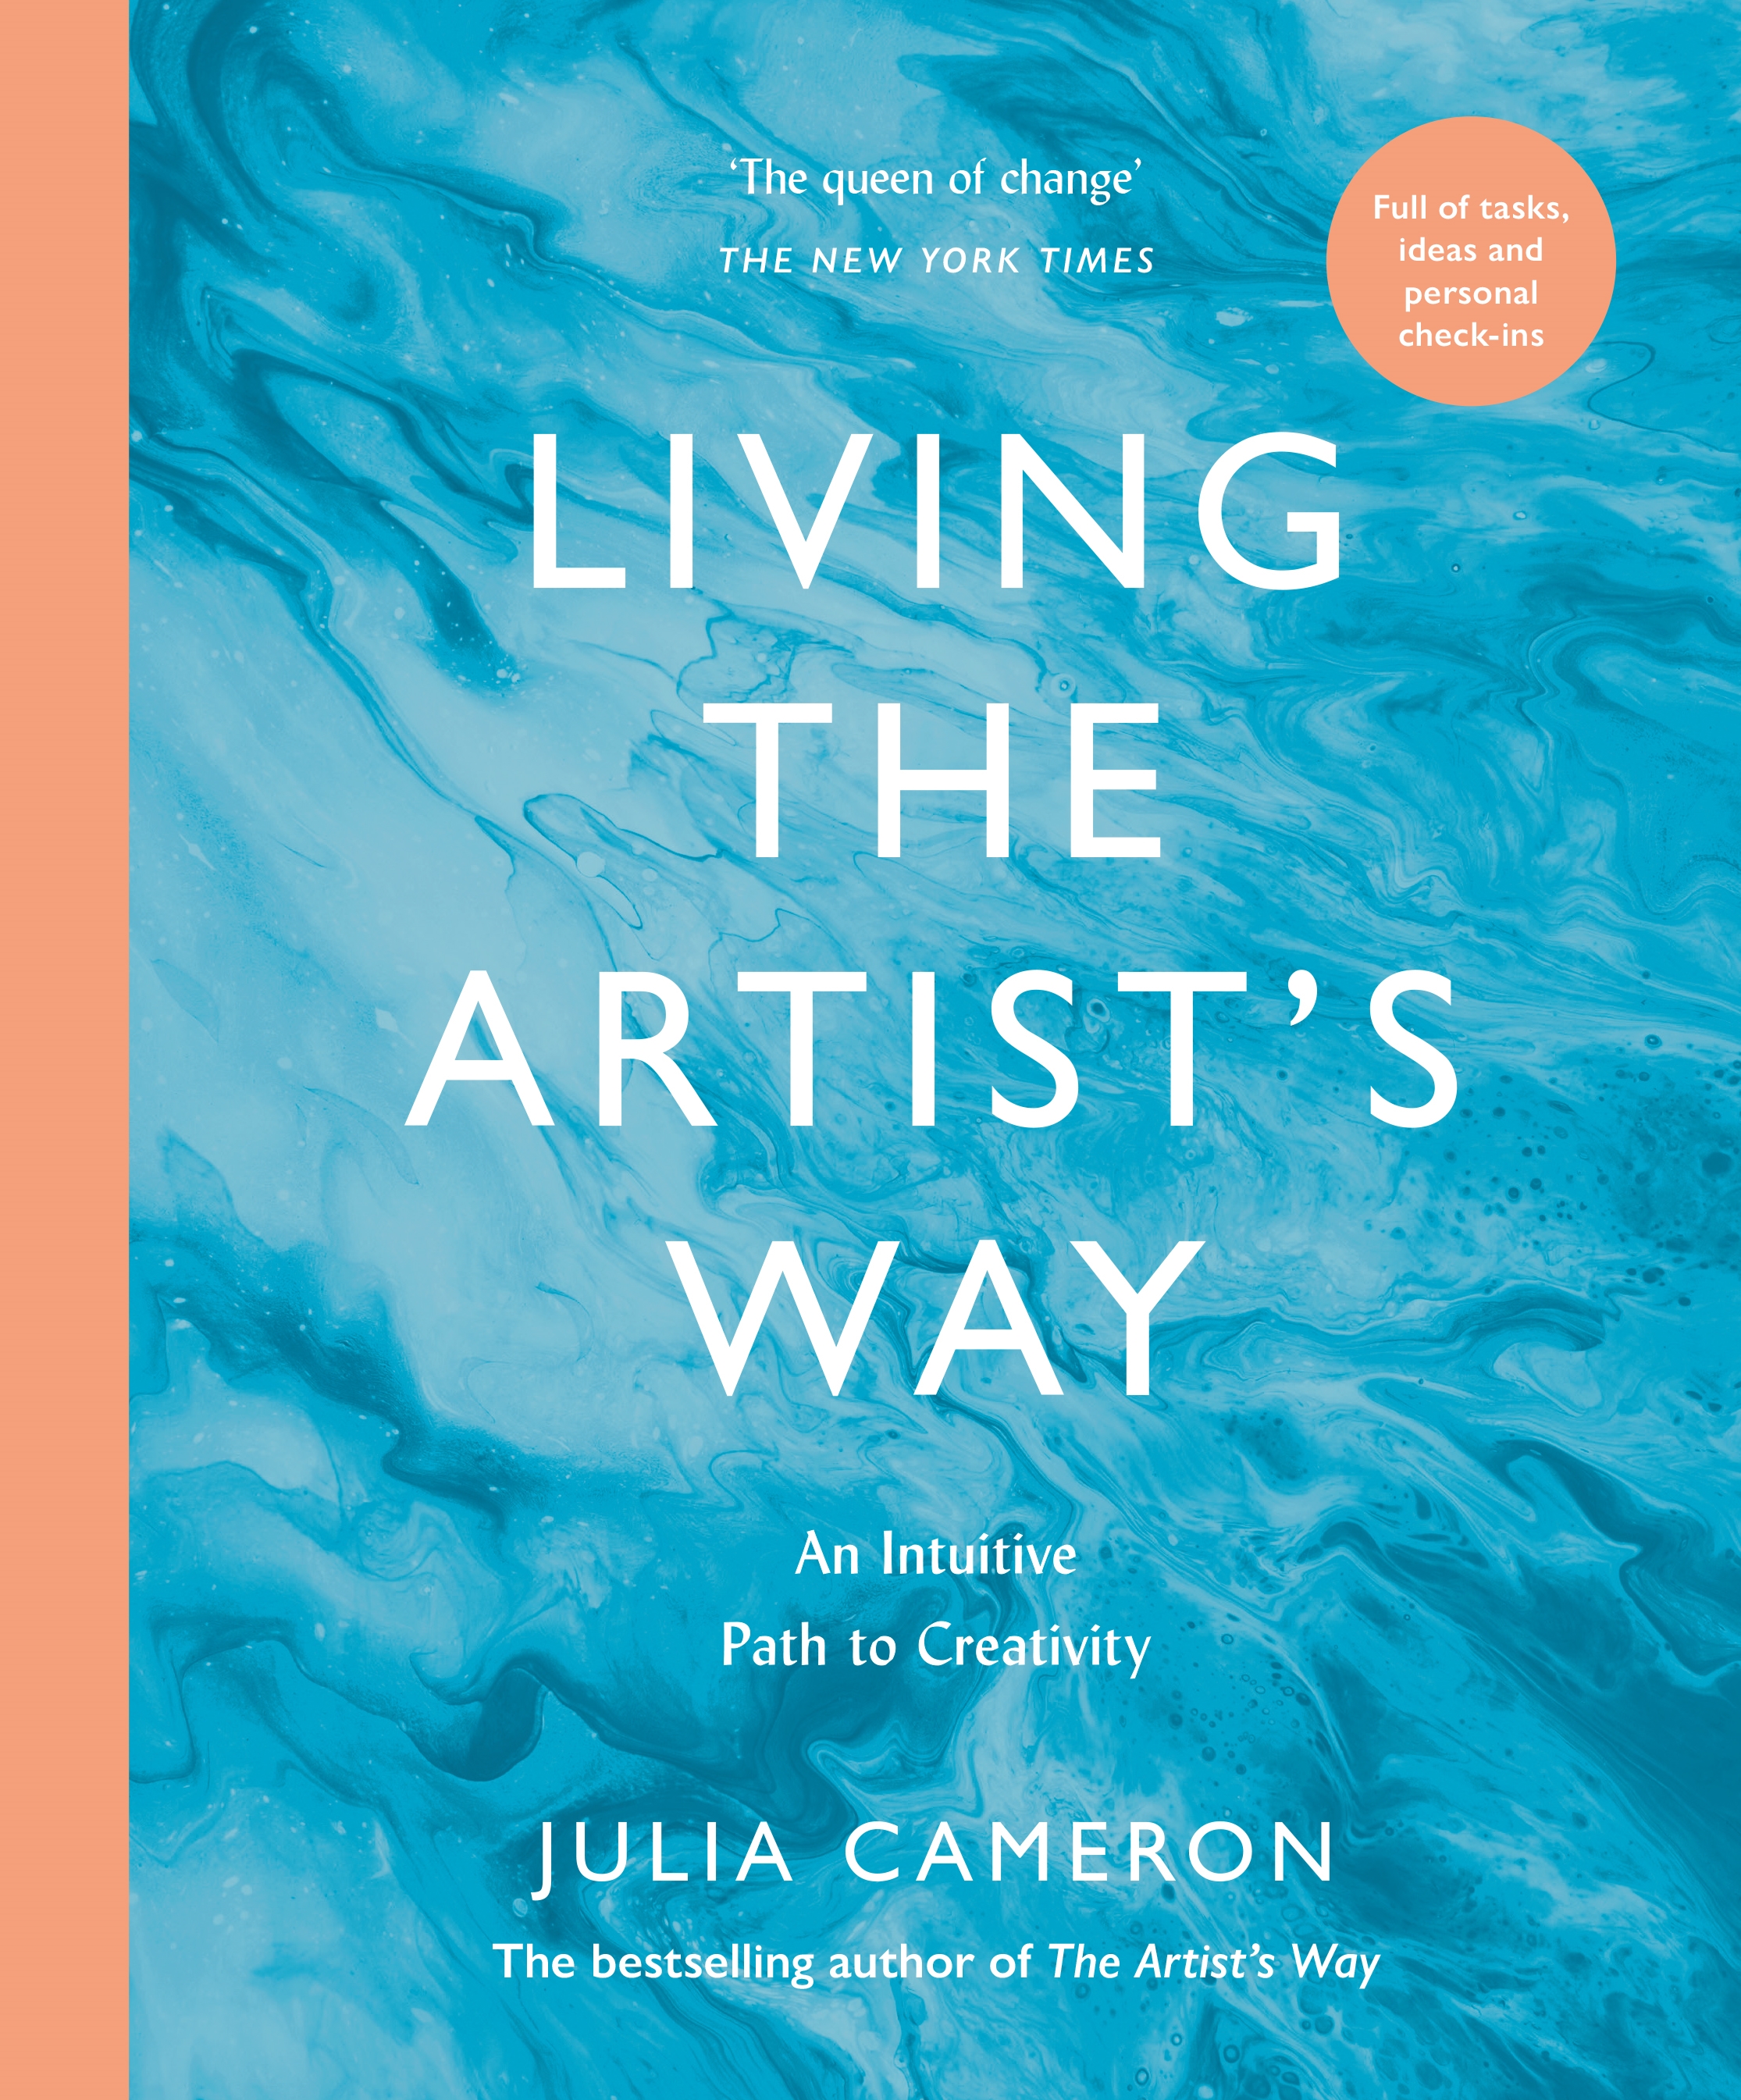 The artist's way by Julia Cameron